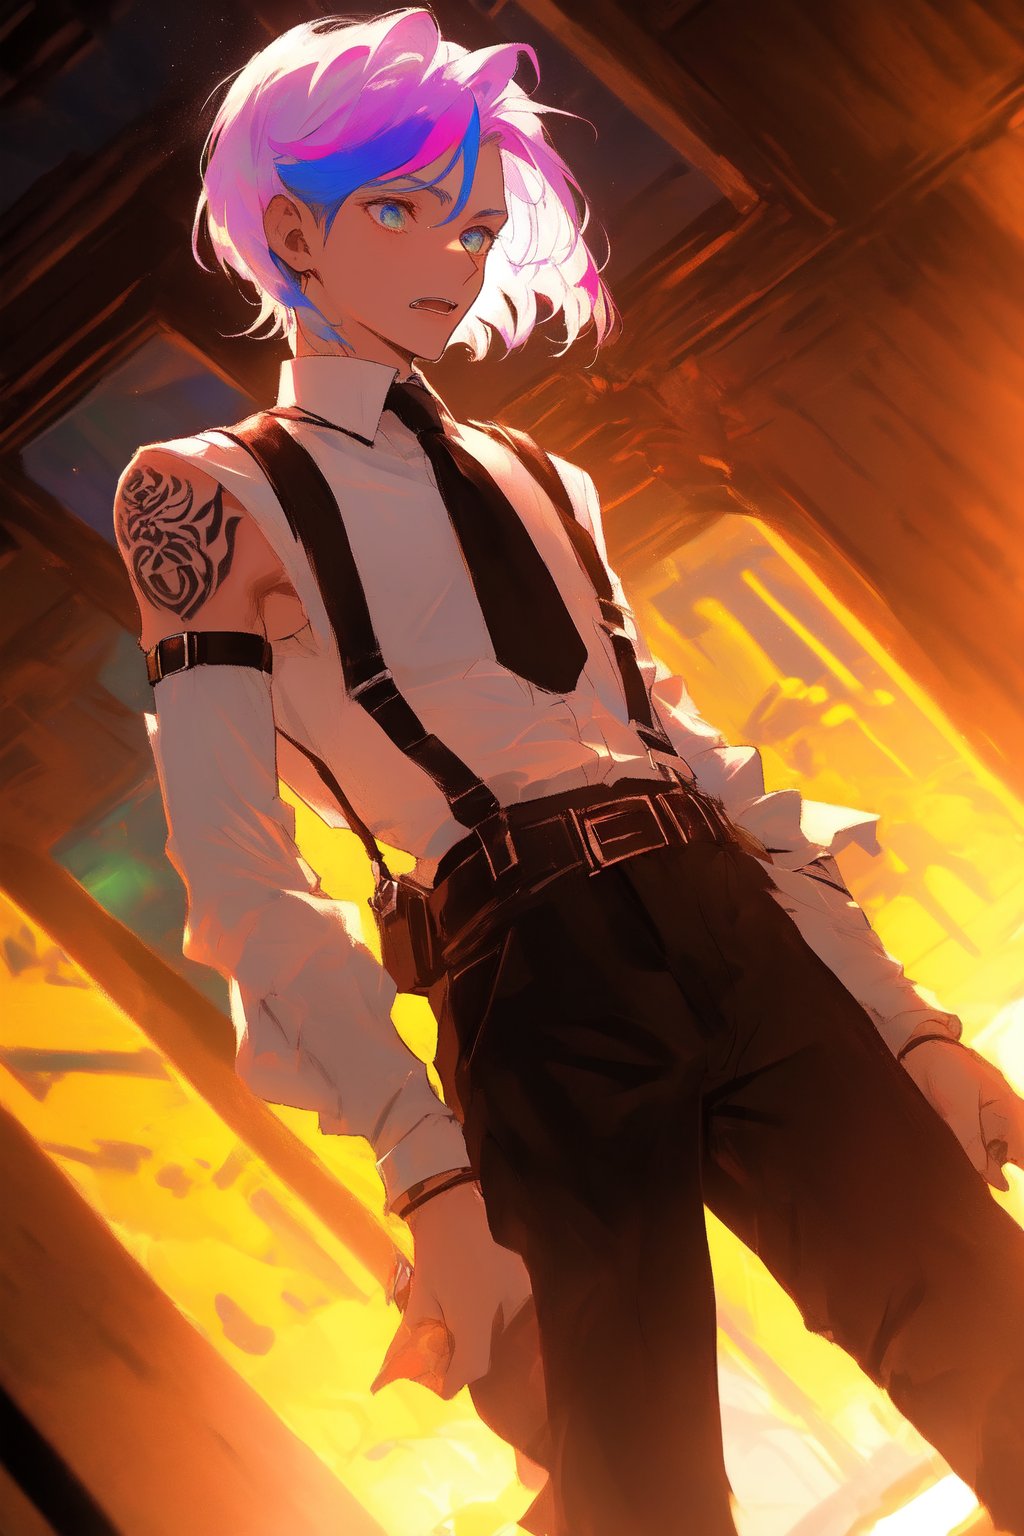 1_man, masculine, pale_skin, sharp_features, sharp_jawline, thin_nose, (perfect), light_particles, white_shirt, sleevless_shirt, black_tie, belt, collared_shirt, (sleeveless), shoulder_holster, shirt_tucked_in, suspenders, leather_harness, white_pants, high_heels, blue_tatoos, triangular_tatoos, glowing_tatoos, multicoloured_hairy, shiny_hair, bangs, shaved_sides, middle_parting, short_hair, white_hair, tatoos_under_eyes, leather_harness, harness, rainbow_hair, jojo_no_kimyou_na_bouken, jojo pose, menacing (jojo), cowboy shot, Dutch angle, perfect anatomy, perfect proportions, best quality, masterpiece, high_resolution, dutch angle, cowboy shot, photo background, perfect hands, perfect fingers, intricate details, bowie_wagner